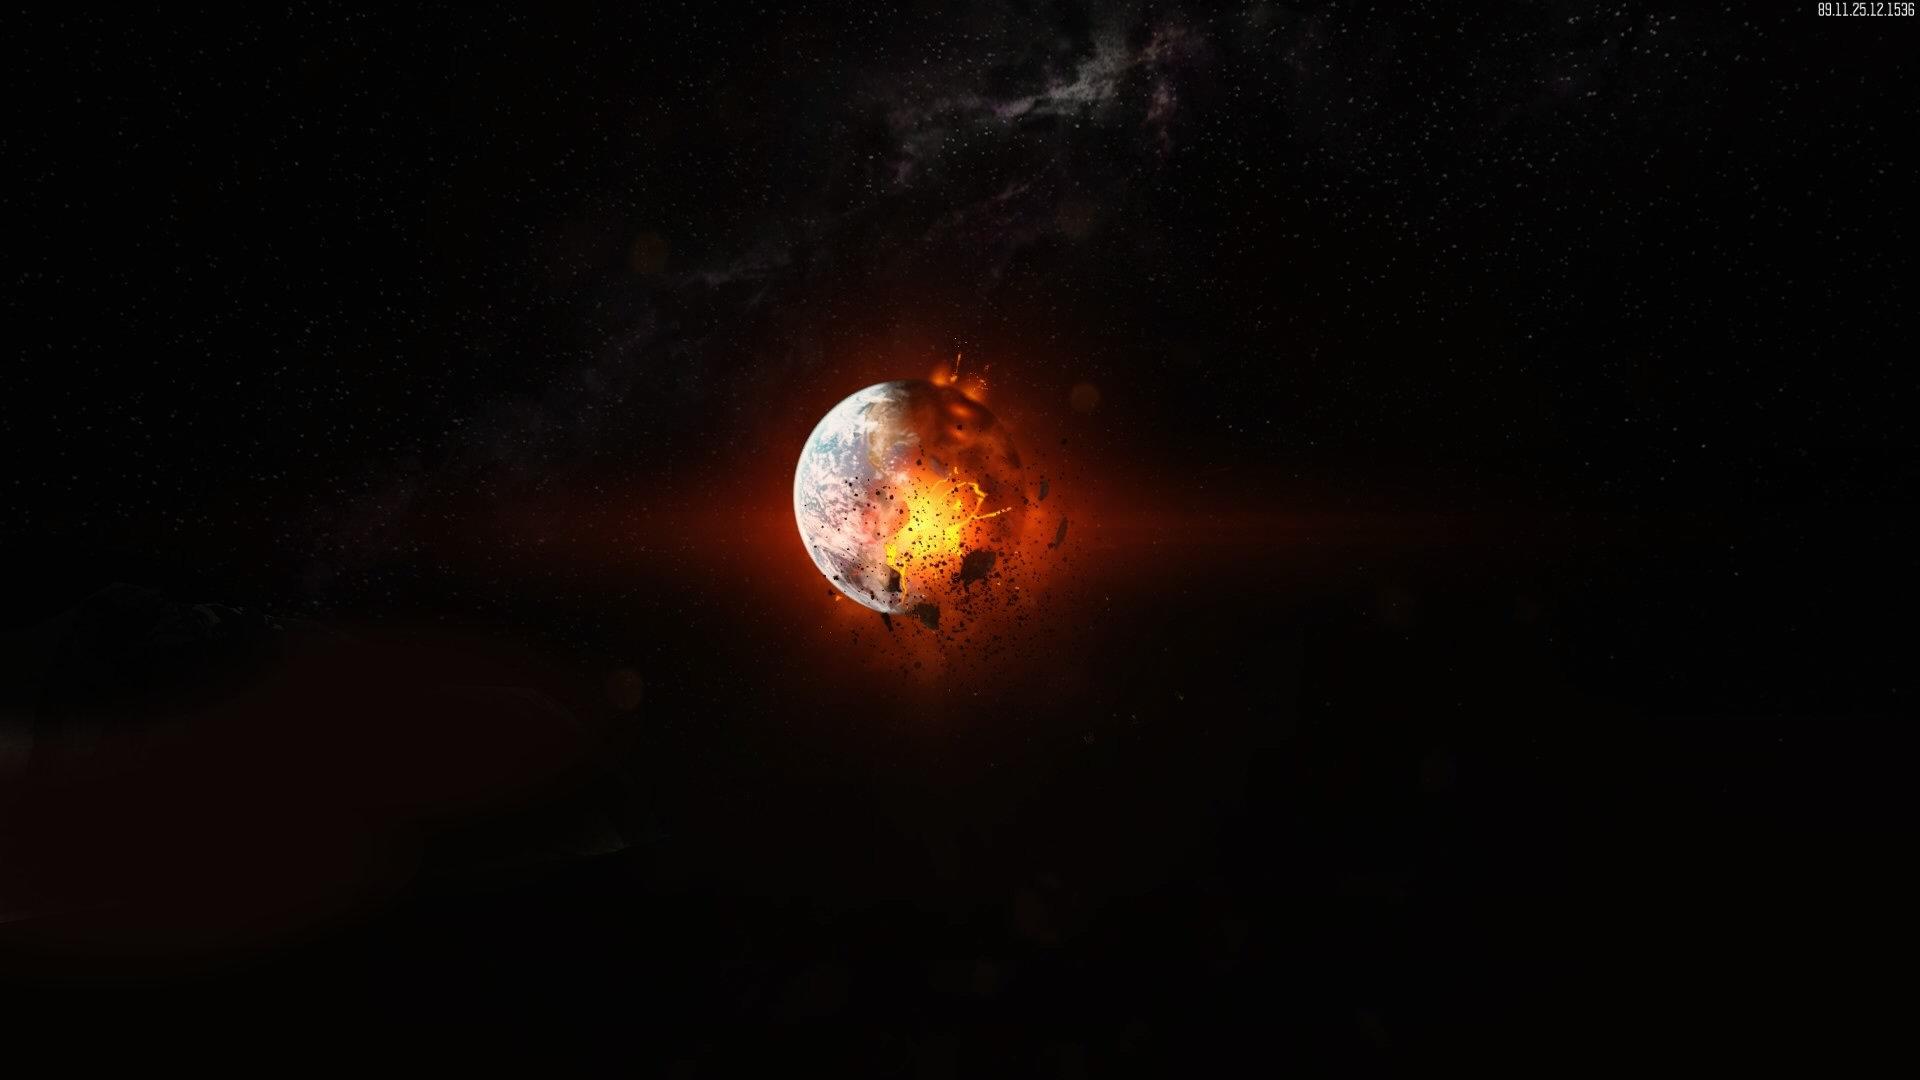 Isolated shot of the Earth exploding from Moon EE, might make a neat wallpaper!